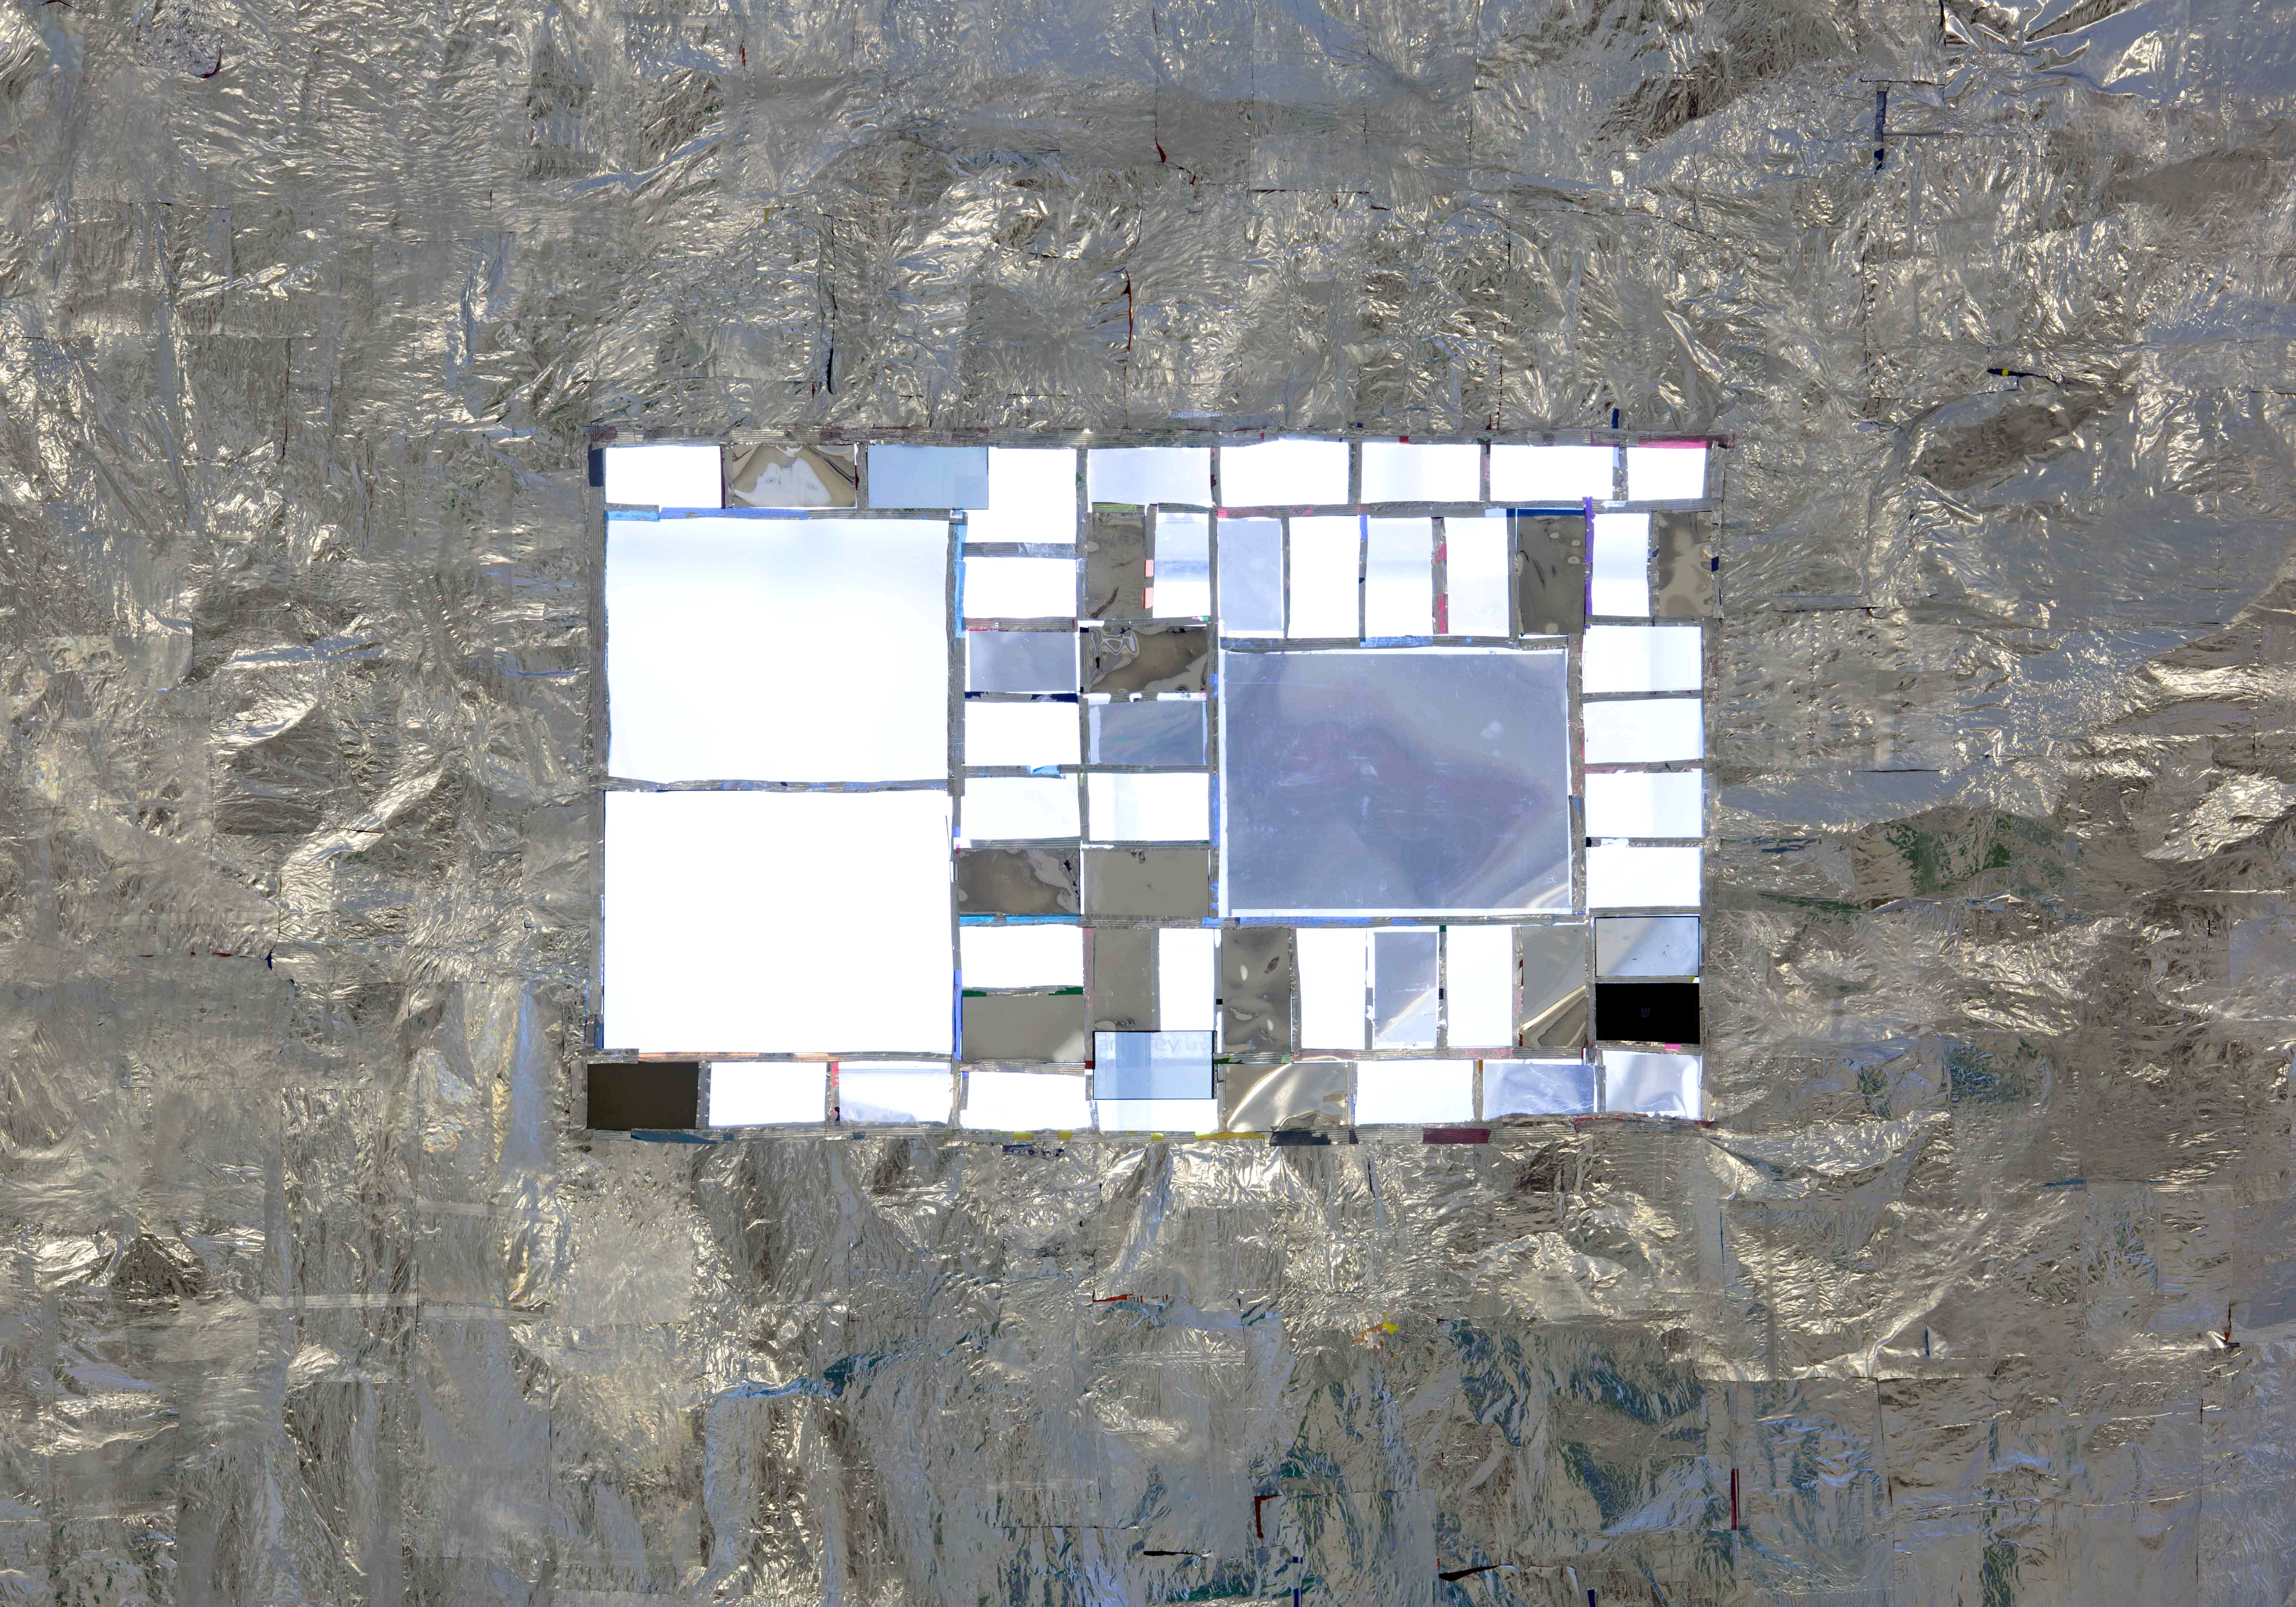 An image showing a rectangular sheet made from crisp packets, ironed together with a crinkly surface. In the centre is a landscape format rectangle made up of smaller and larger rectangular, semi-transparent shapes which are made from mobile phone and laptop screen parts